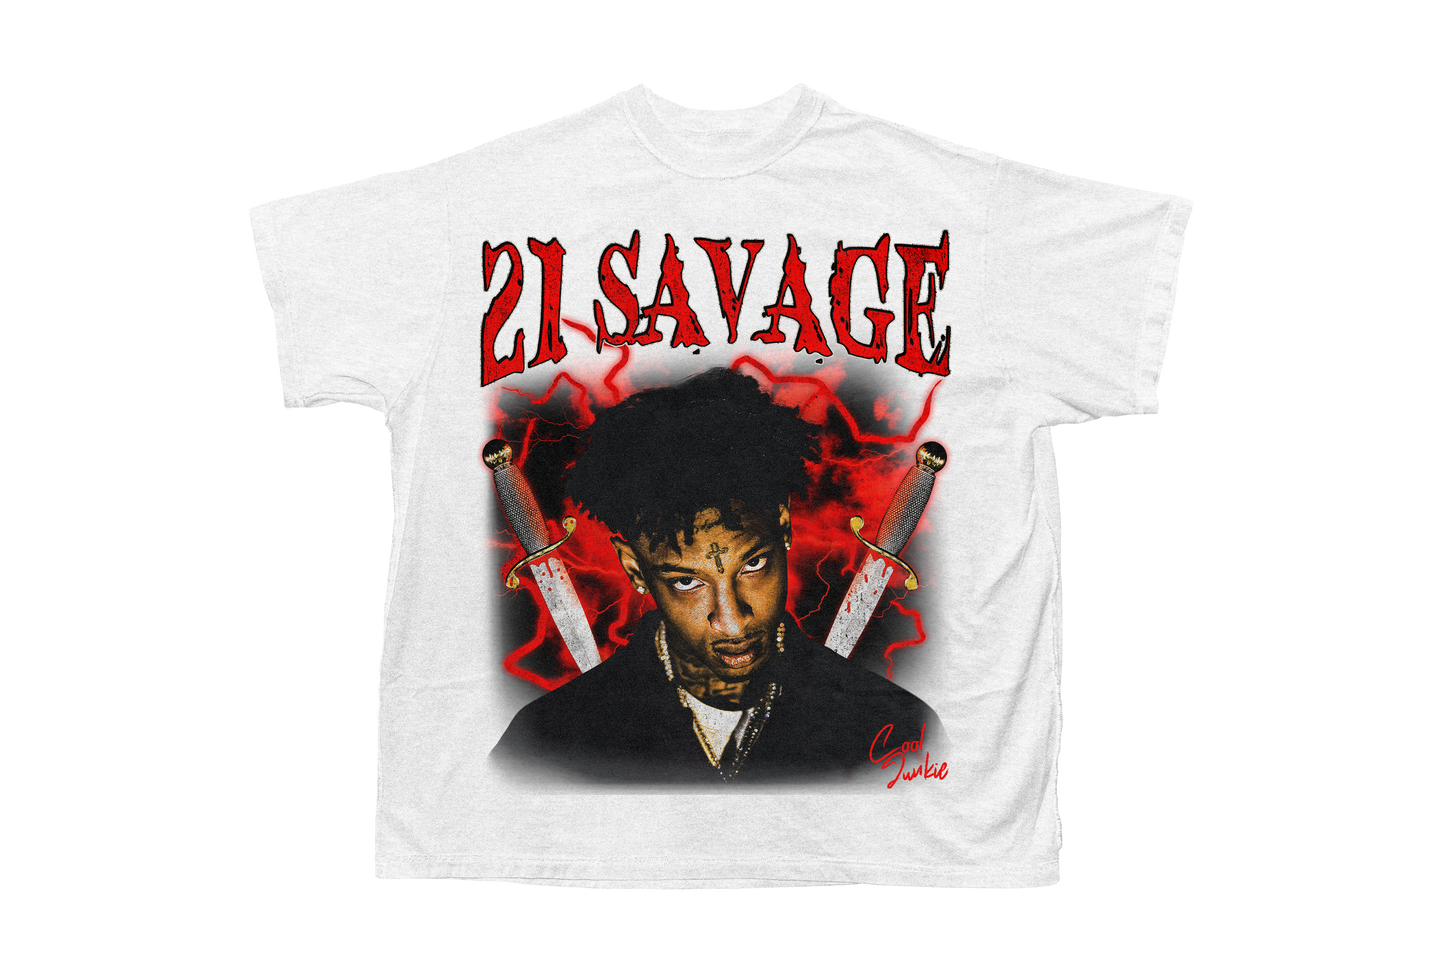 21 Savage white Tee with red as the main color in the design